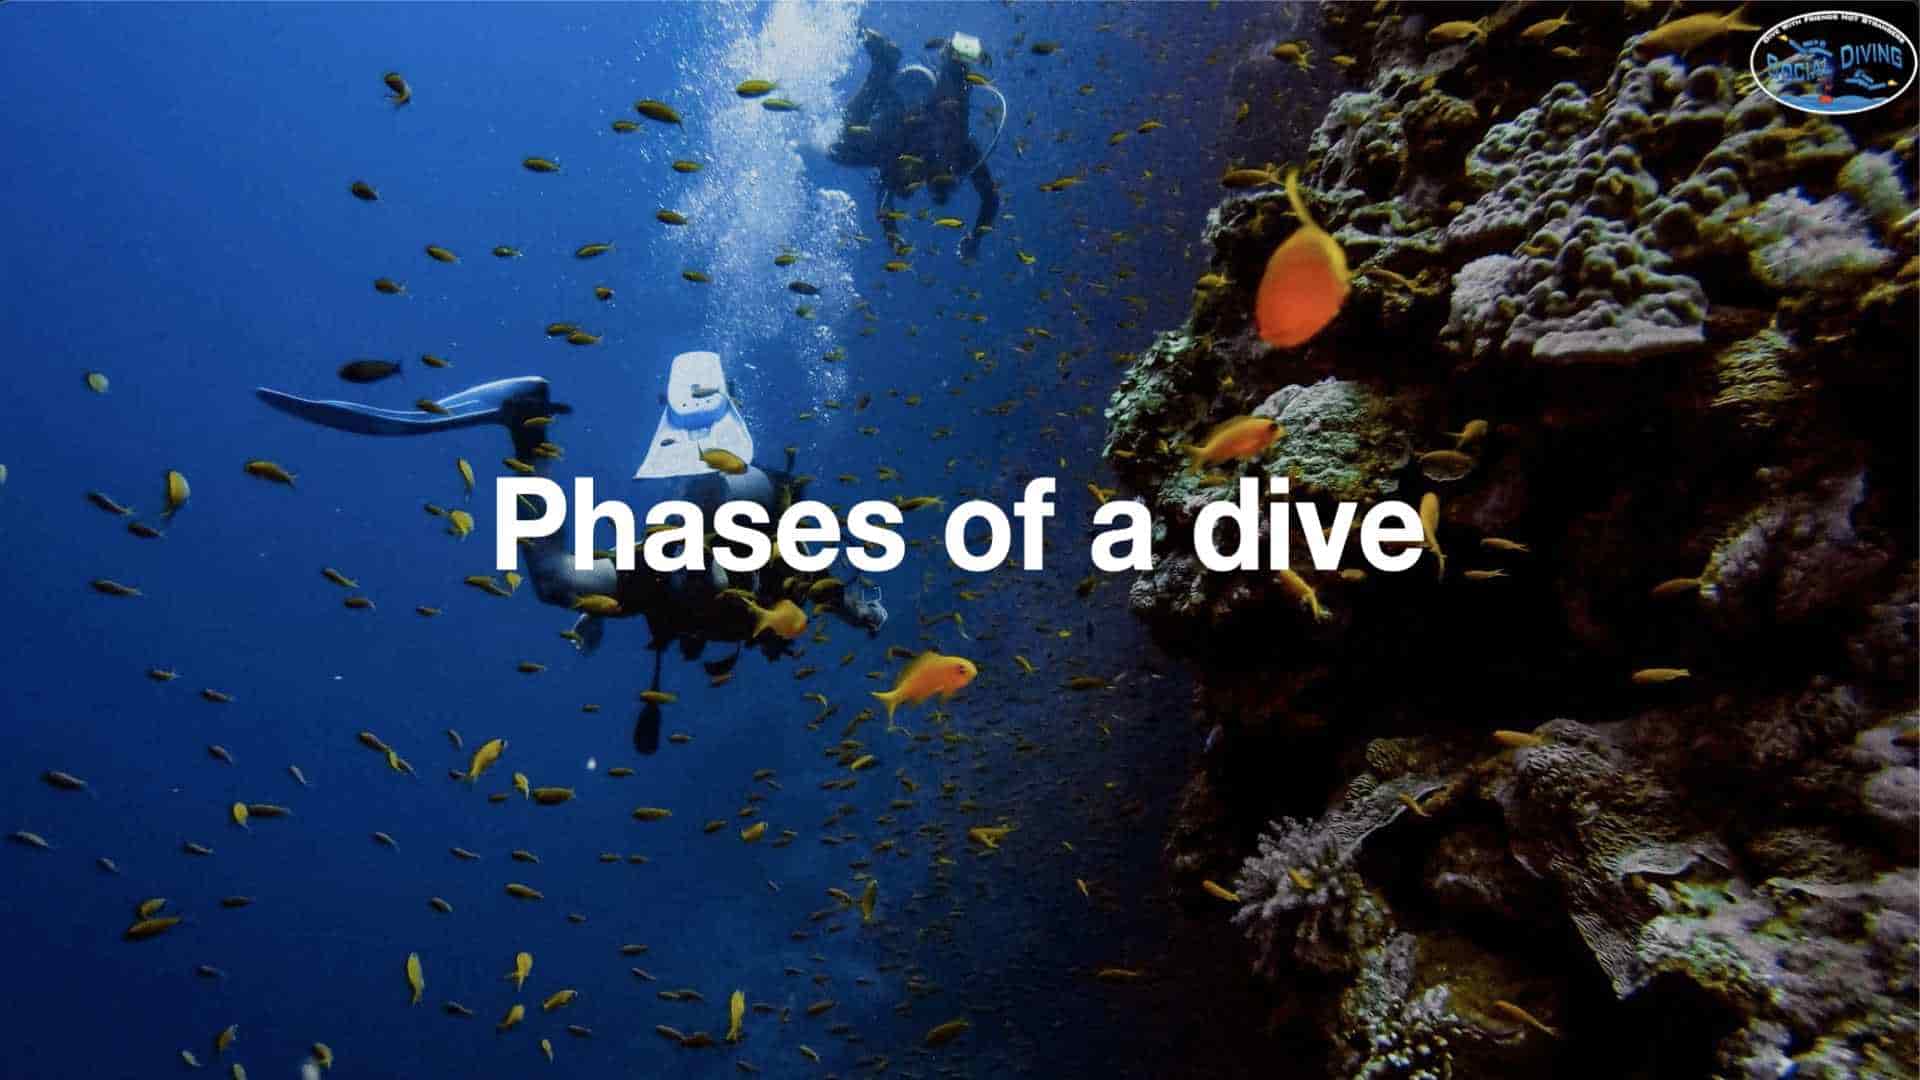 Phases of a dive